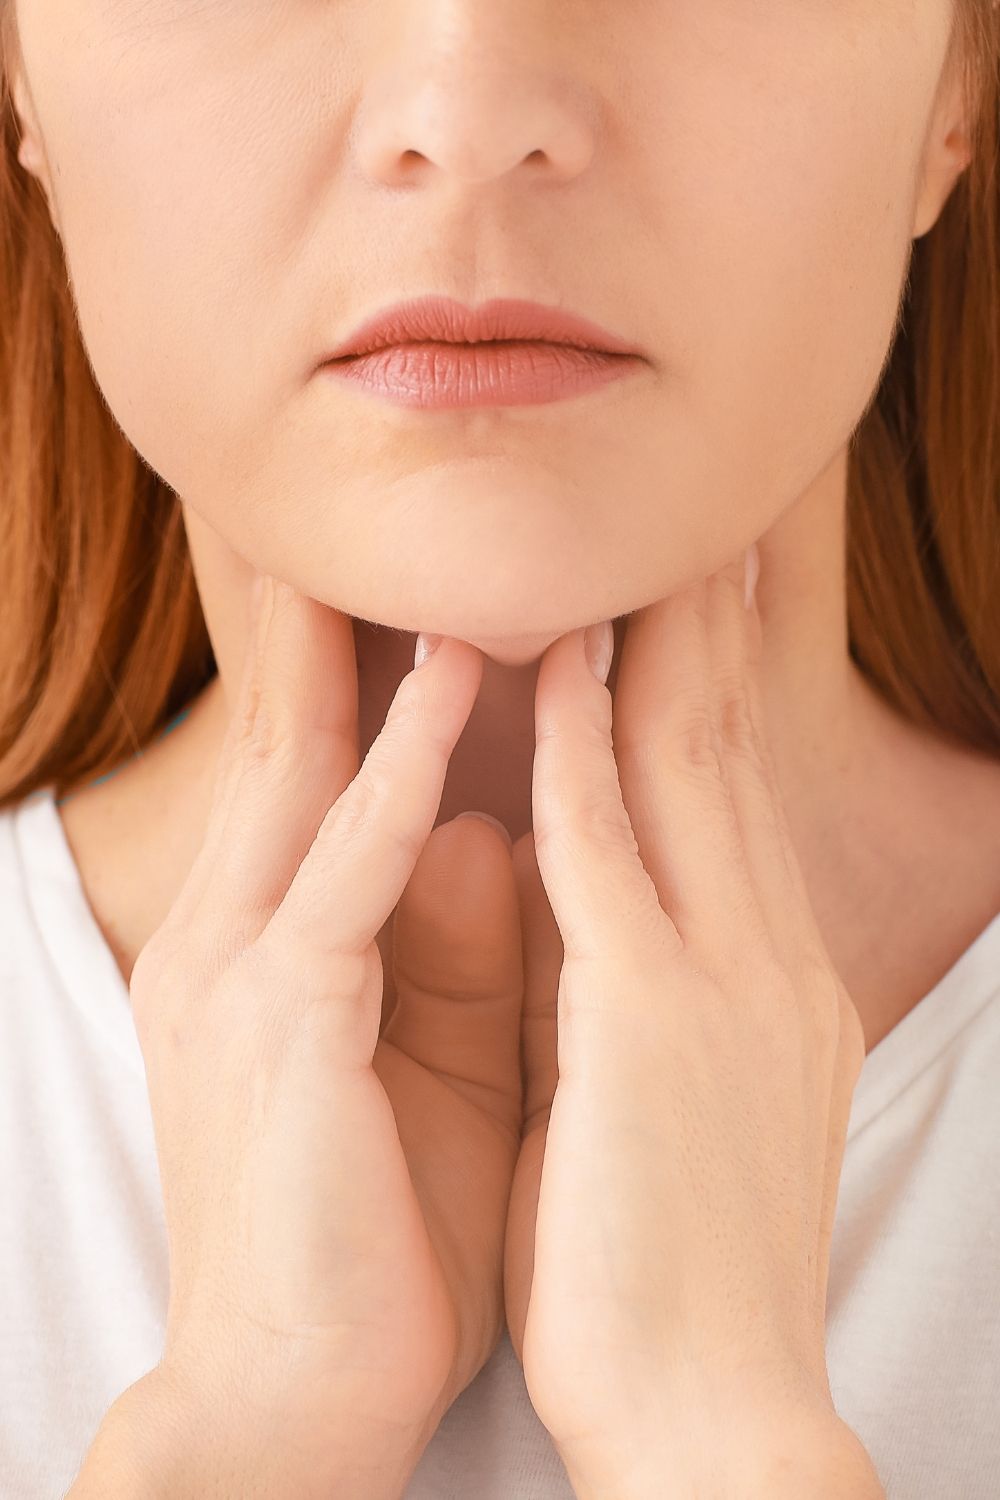 Everything You Need to Know About Thyroid Problems in Women